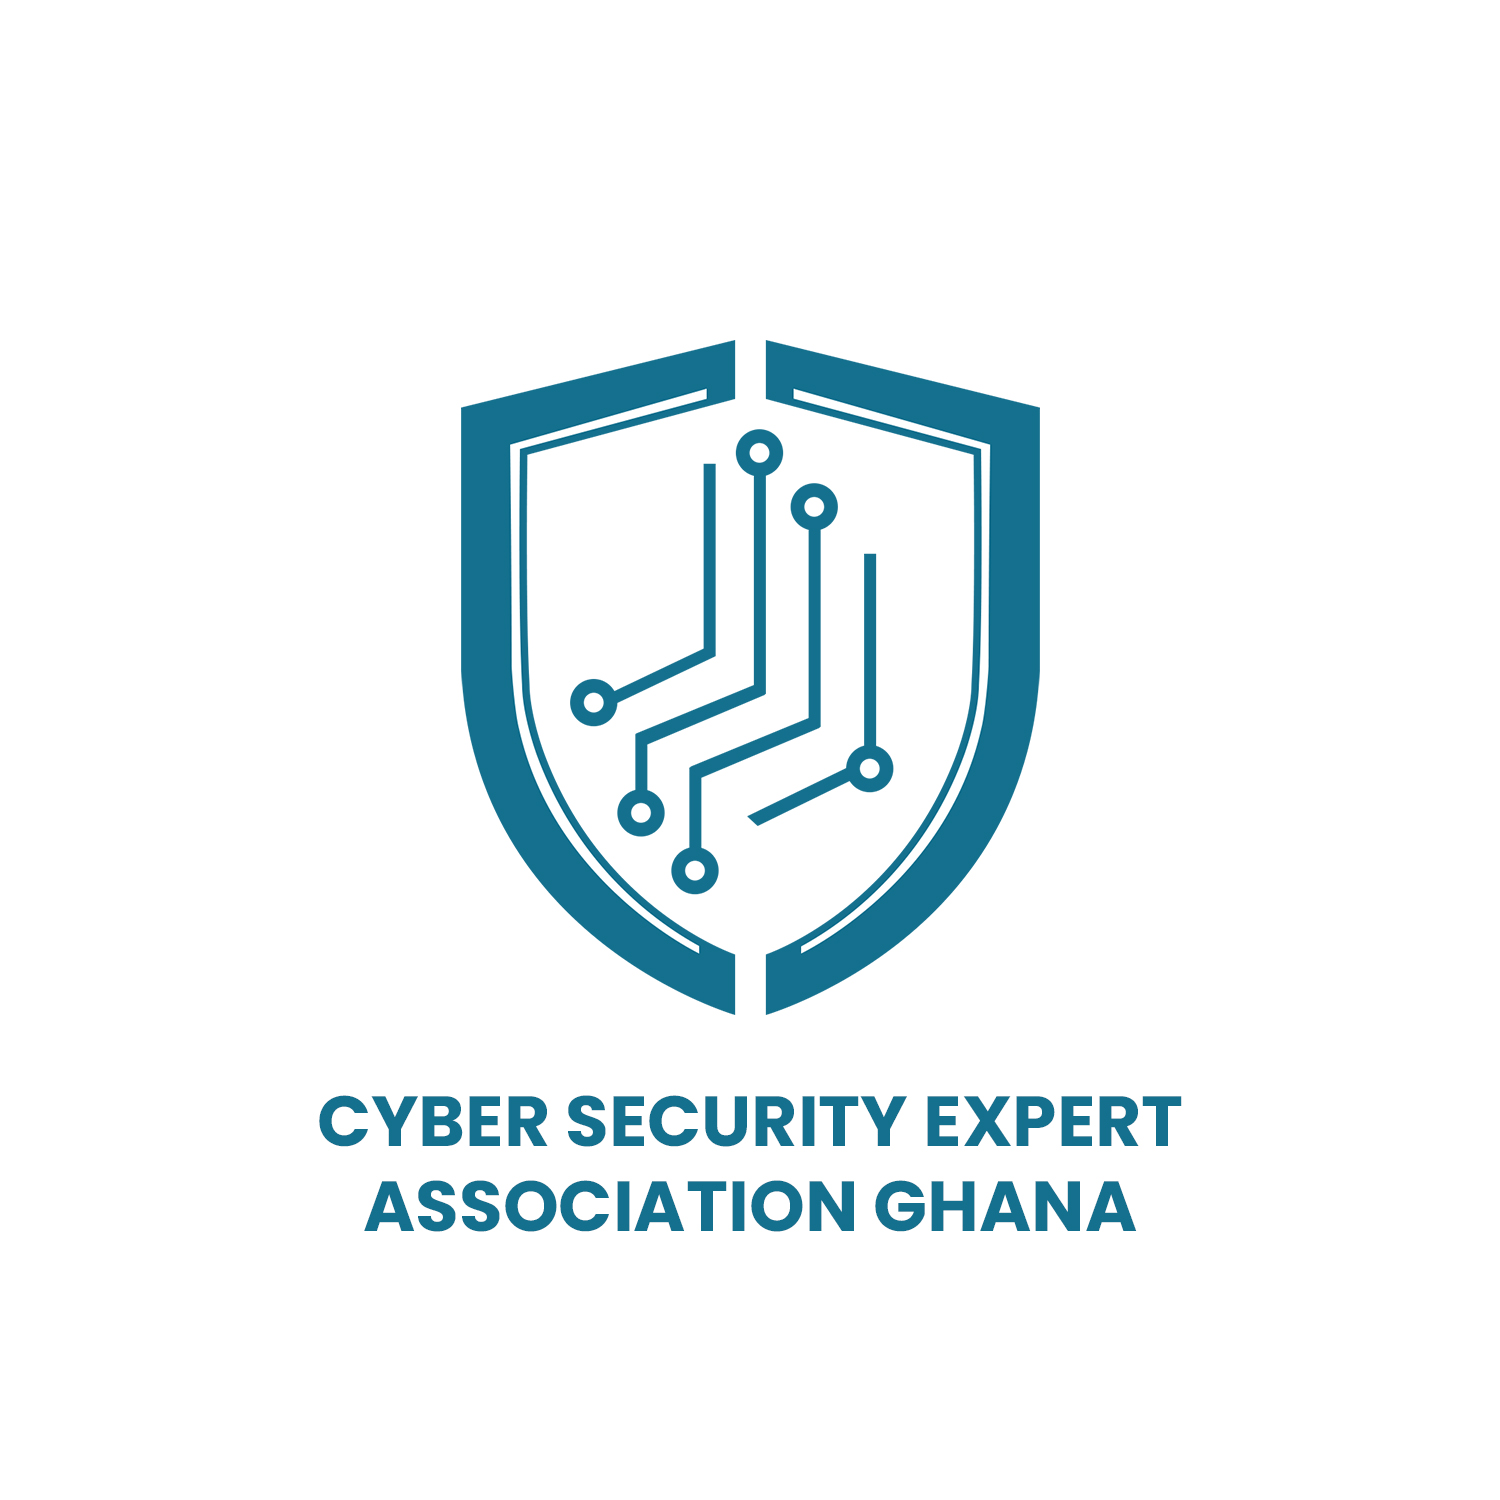 Cyber Security Experts Association Ghana